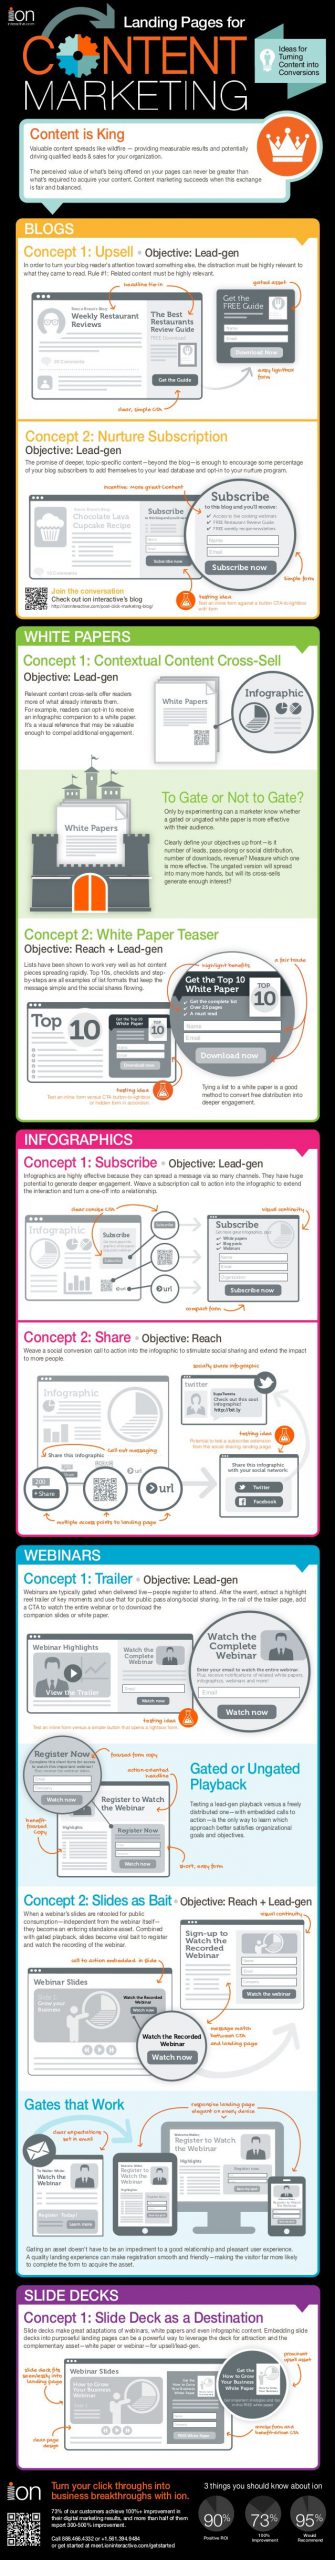 10 ways to increase your content marketing conversion rate infographic scaled 1